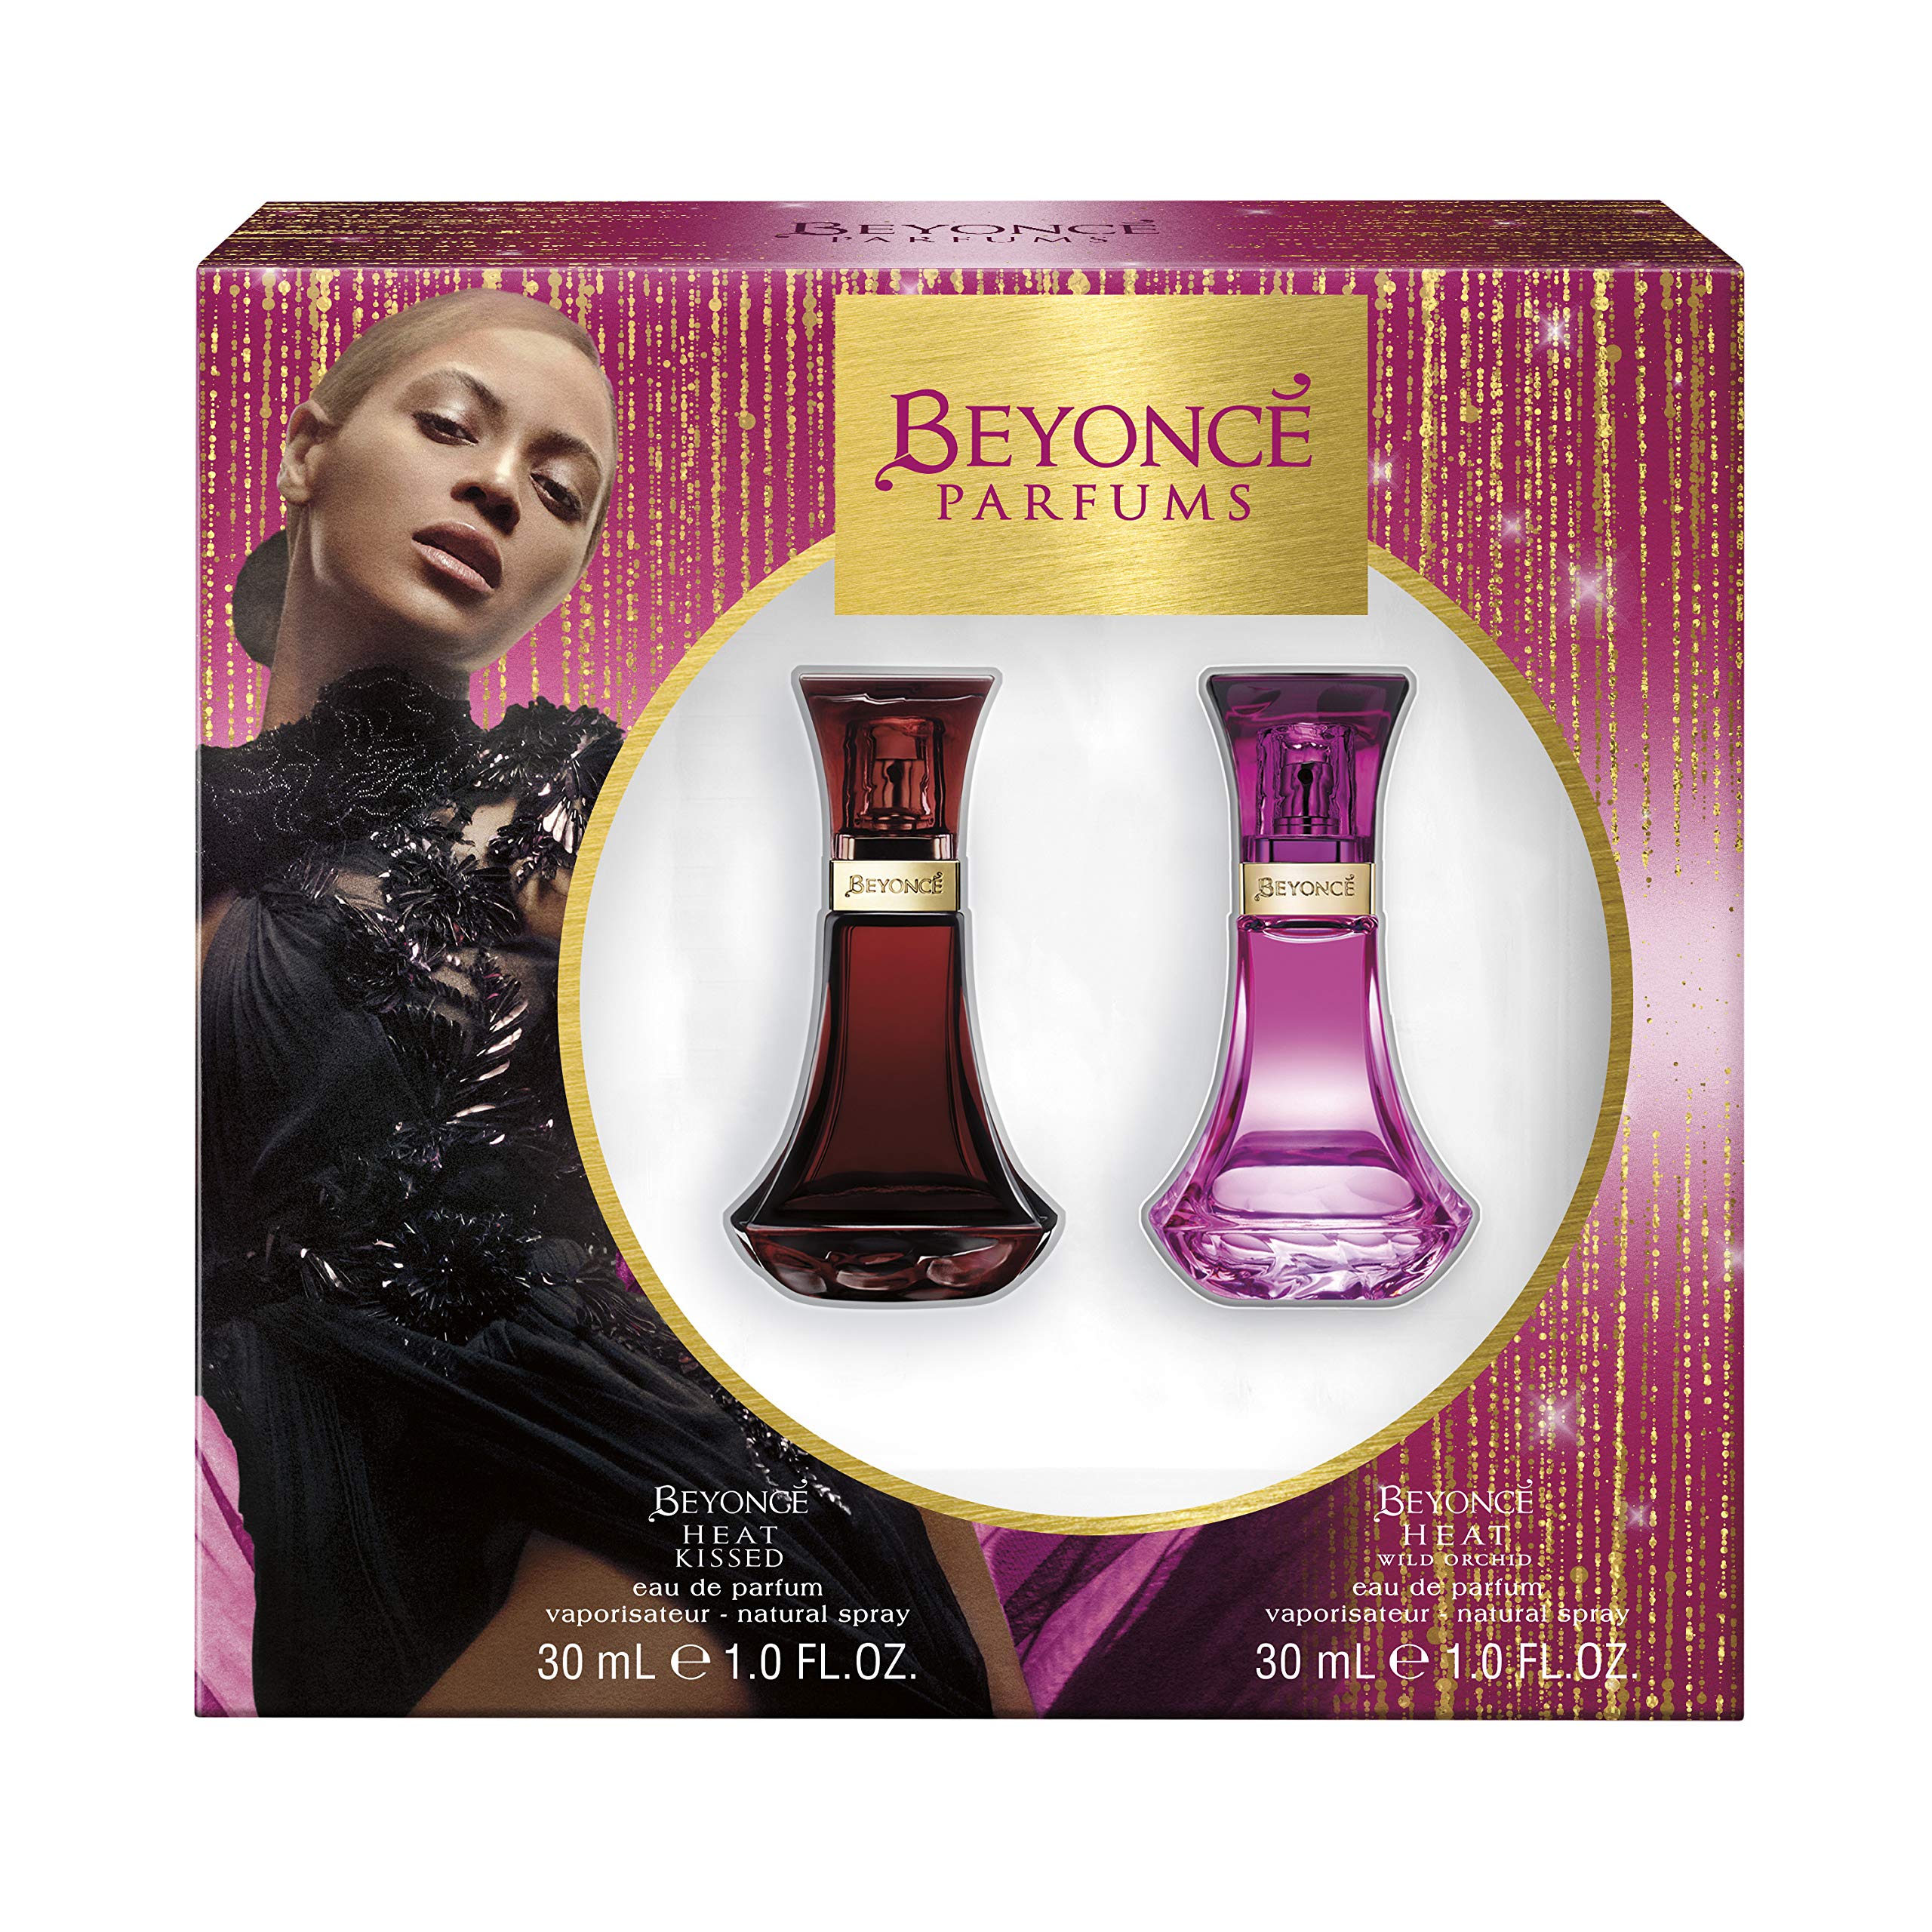 Bliv oppe Uafhængig Caroline Beyonce, Heat Kissed, Heat Wild Orchid, Womens 2 Piece Perfume gift Set,  Total Retail Value $6200